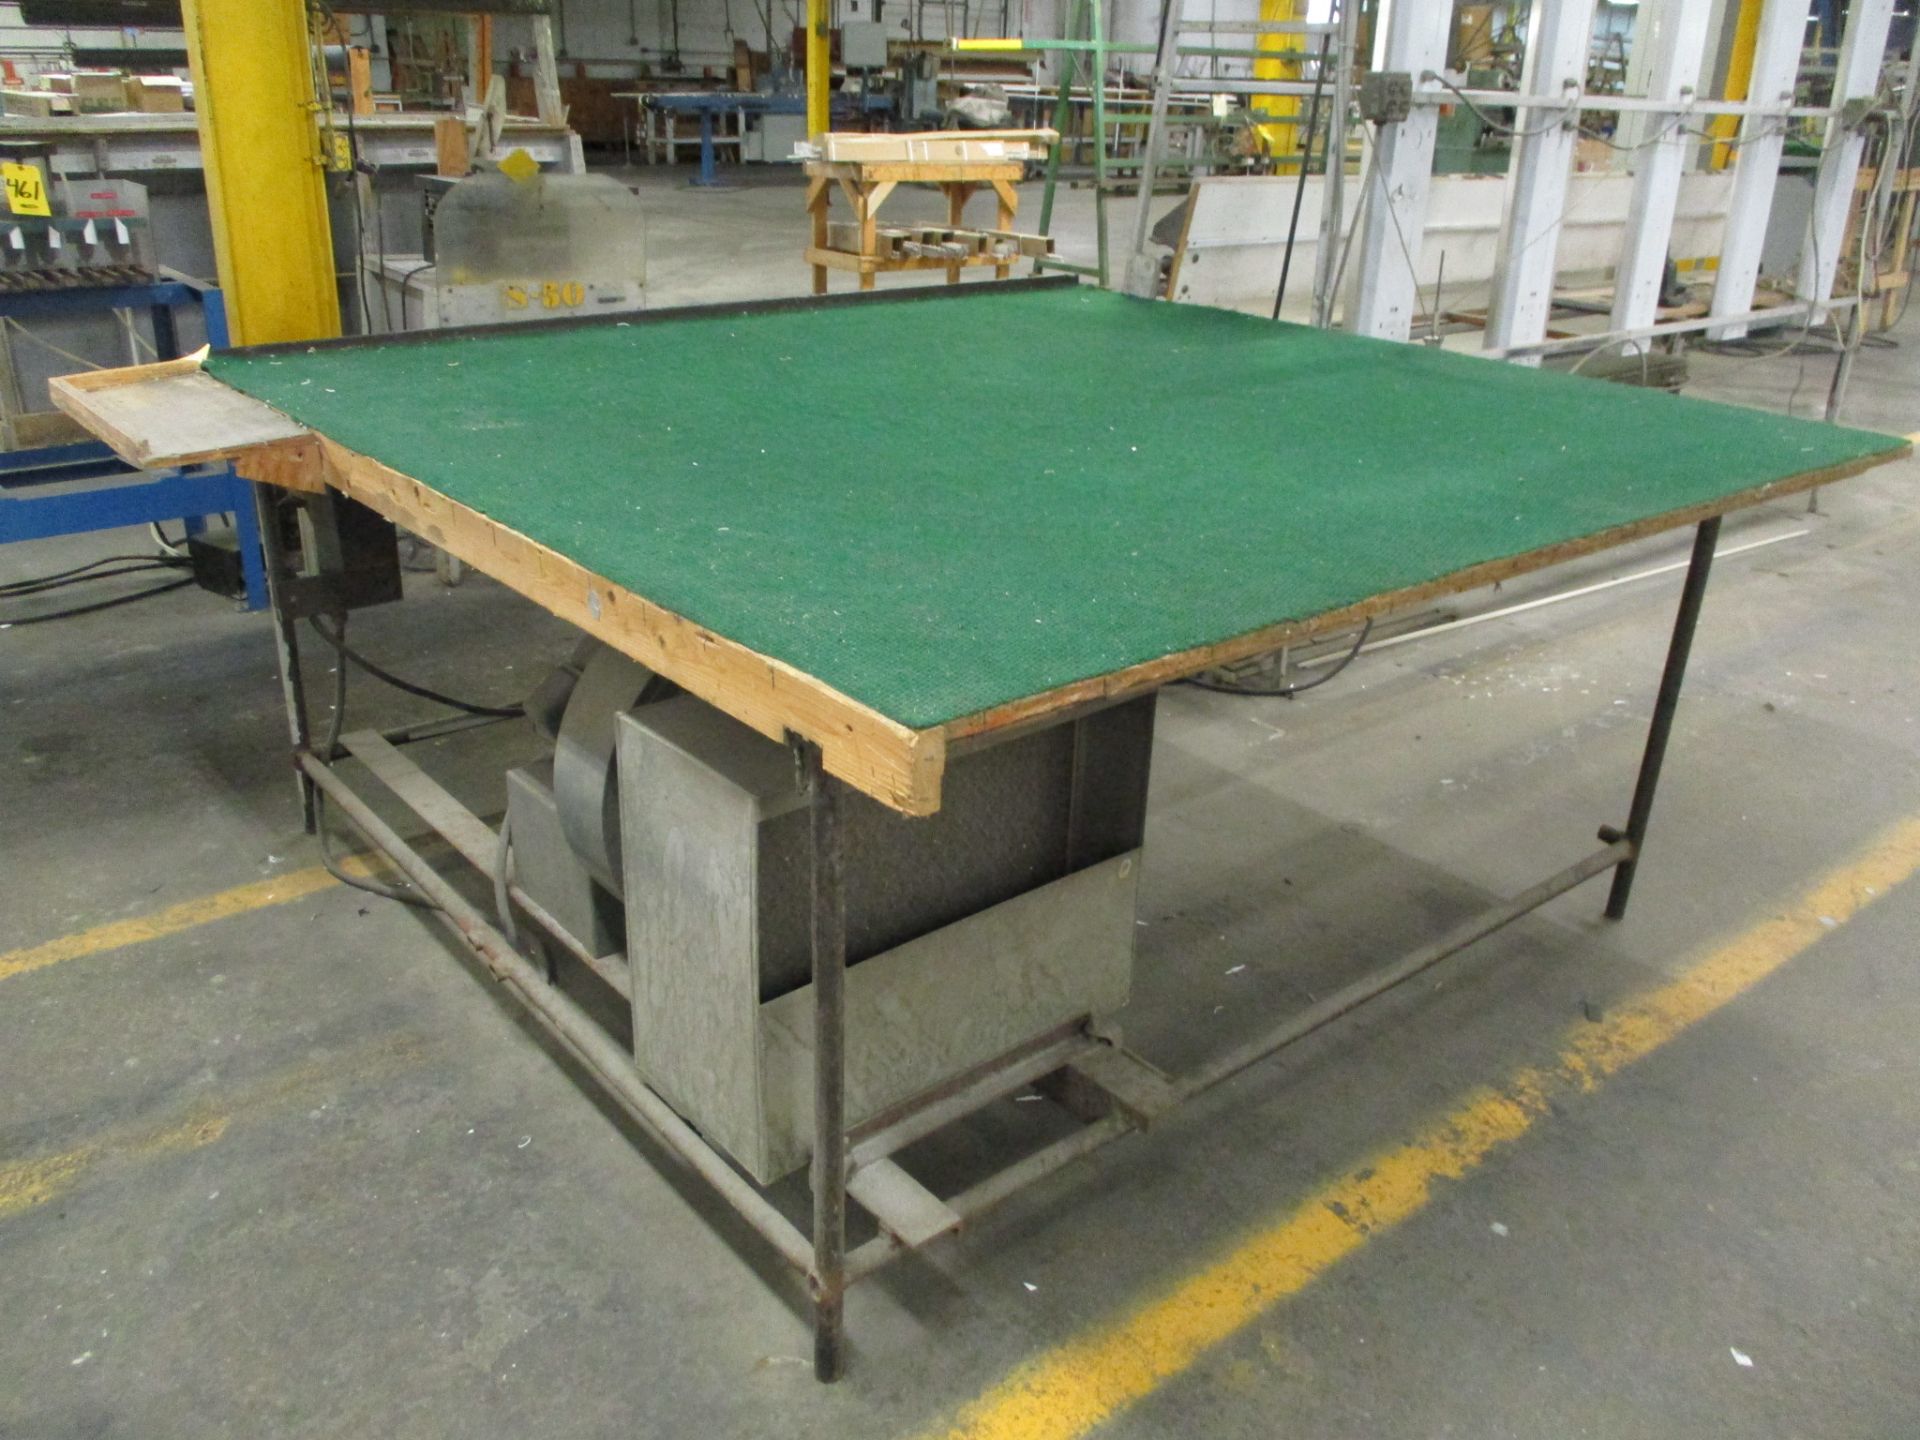 7' x 7' Air Table with Carpet Top